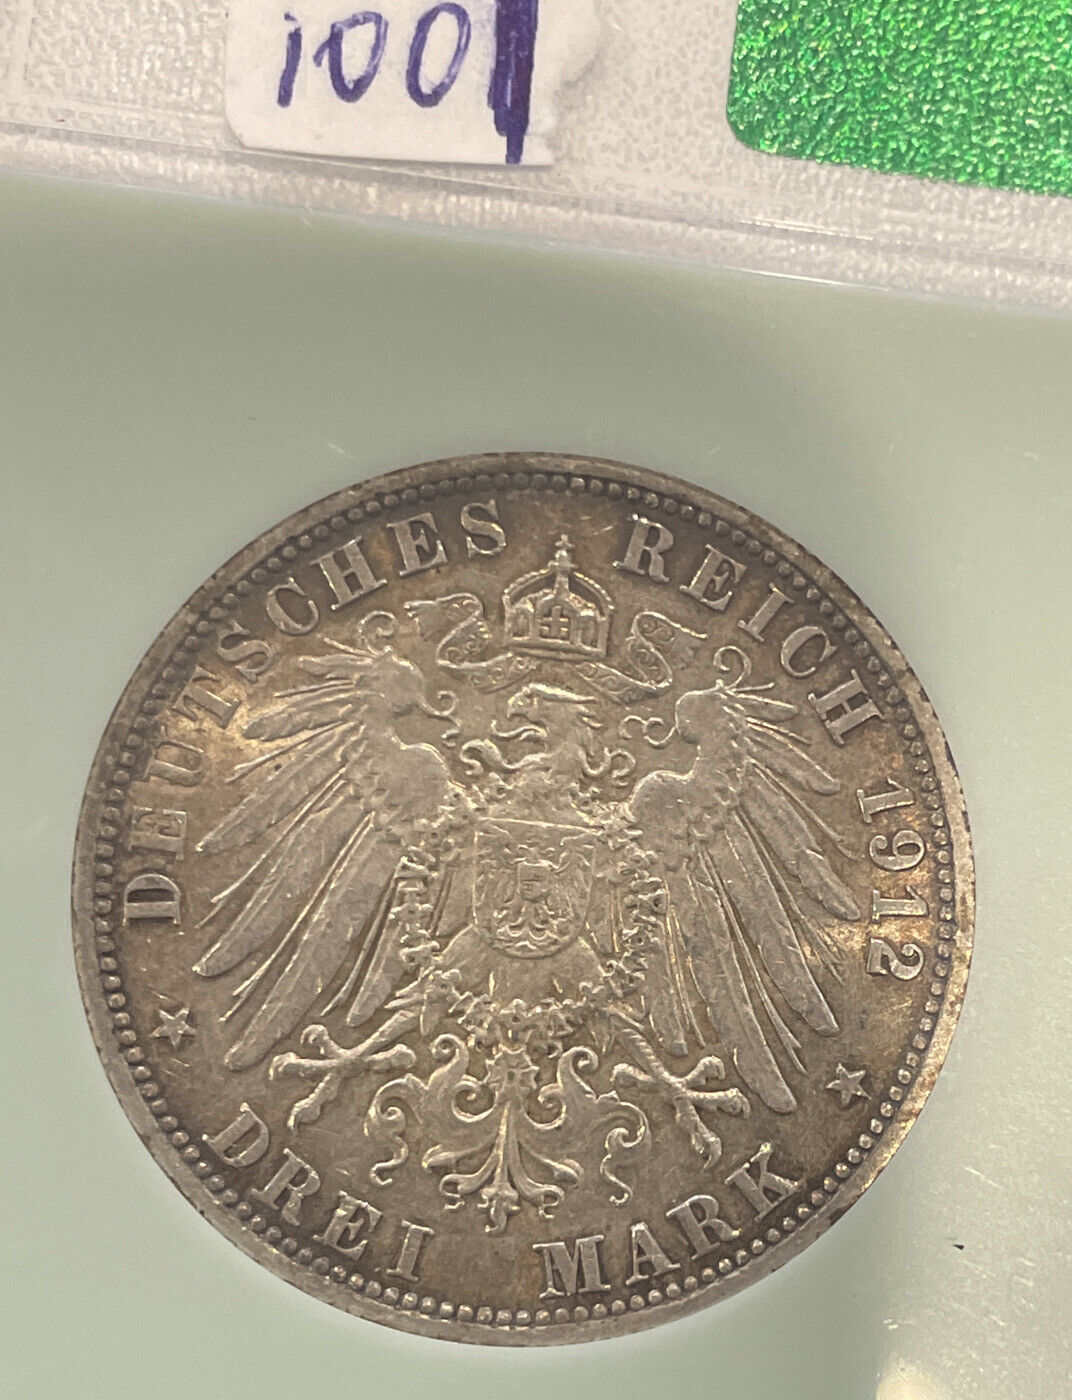 Prussia Germany 3 Mark 1912A almost uncirculated